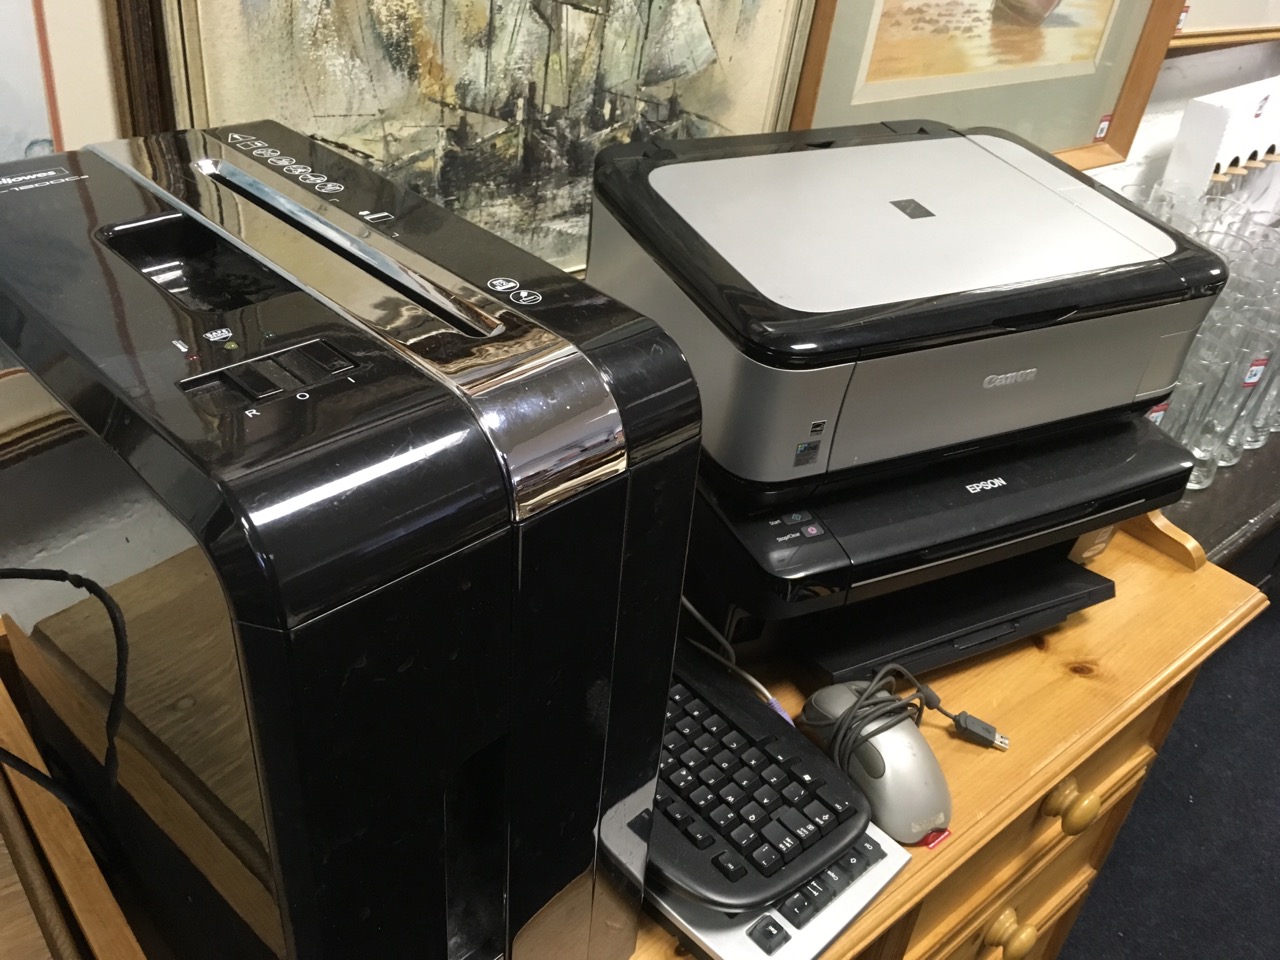 An Epson Stylus SX218 printer/copier; a large Fellows paper shredder; two computer keyboards; a - Image 3 of 3